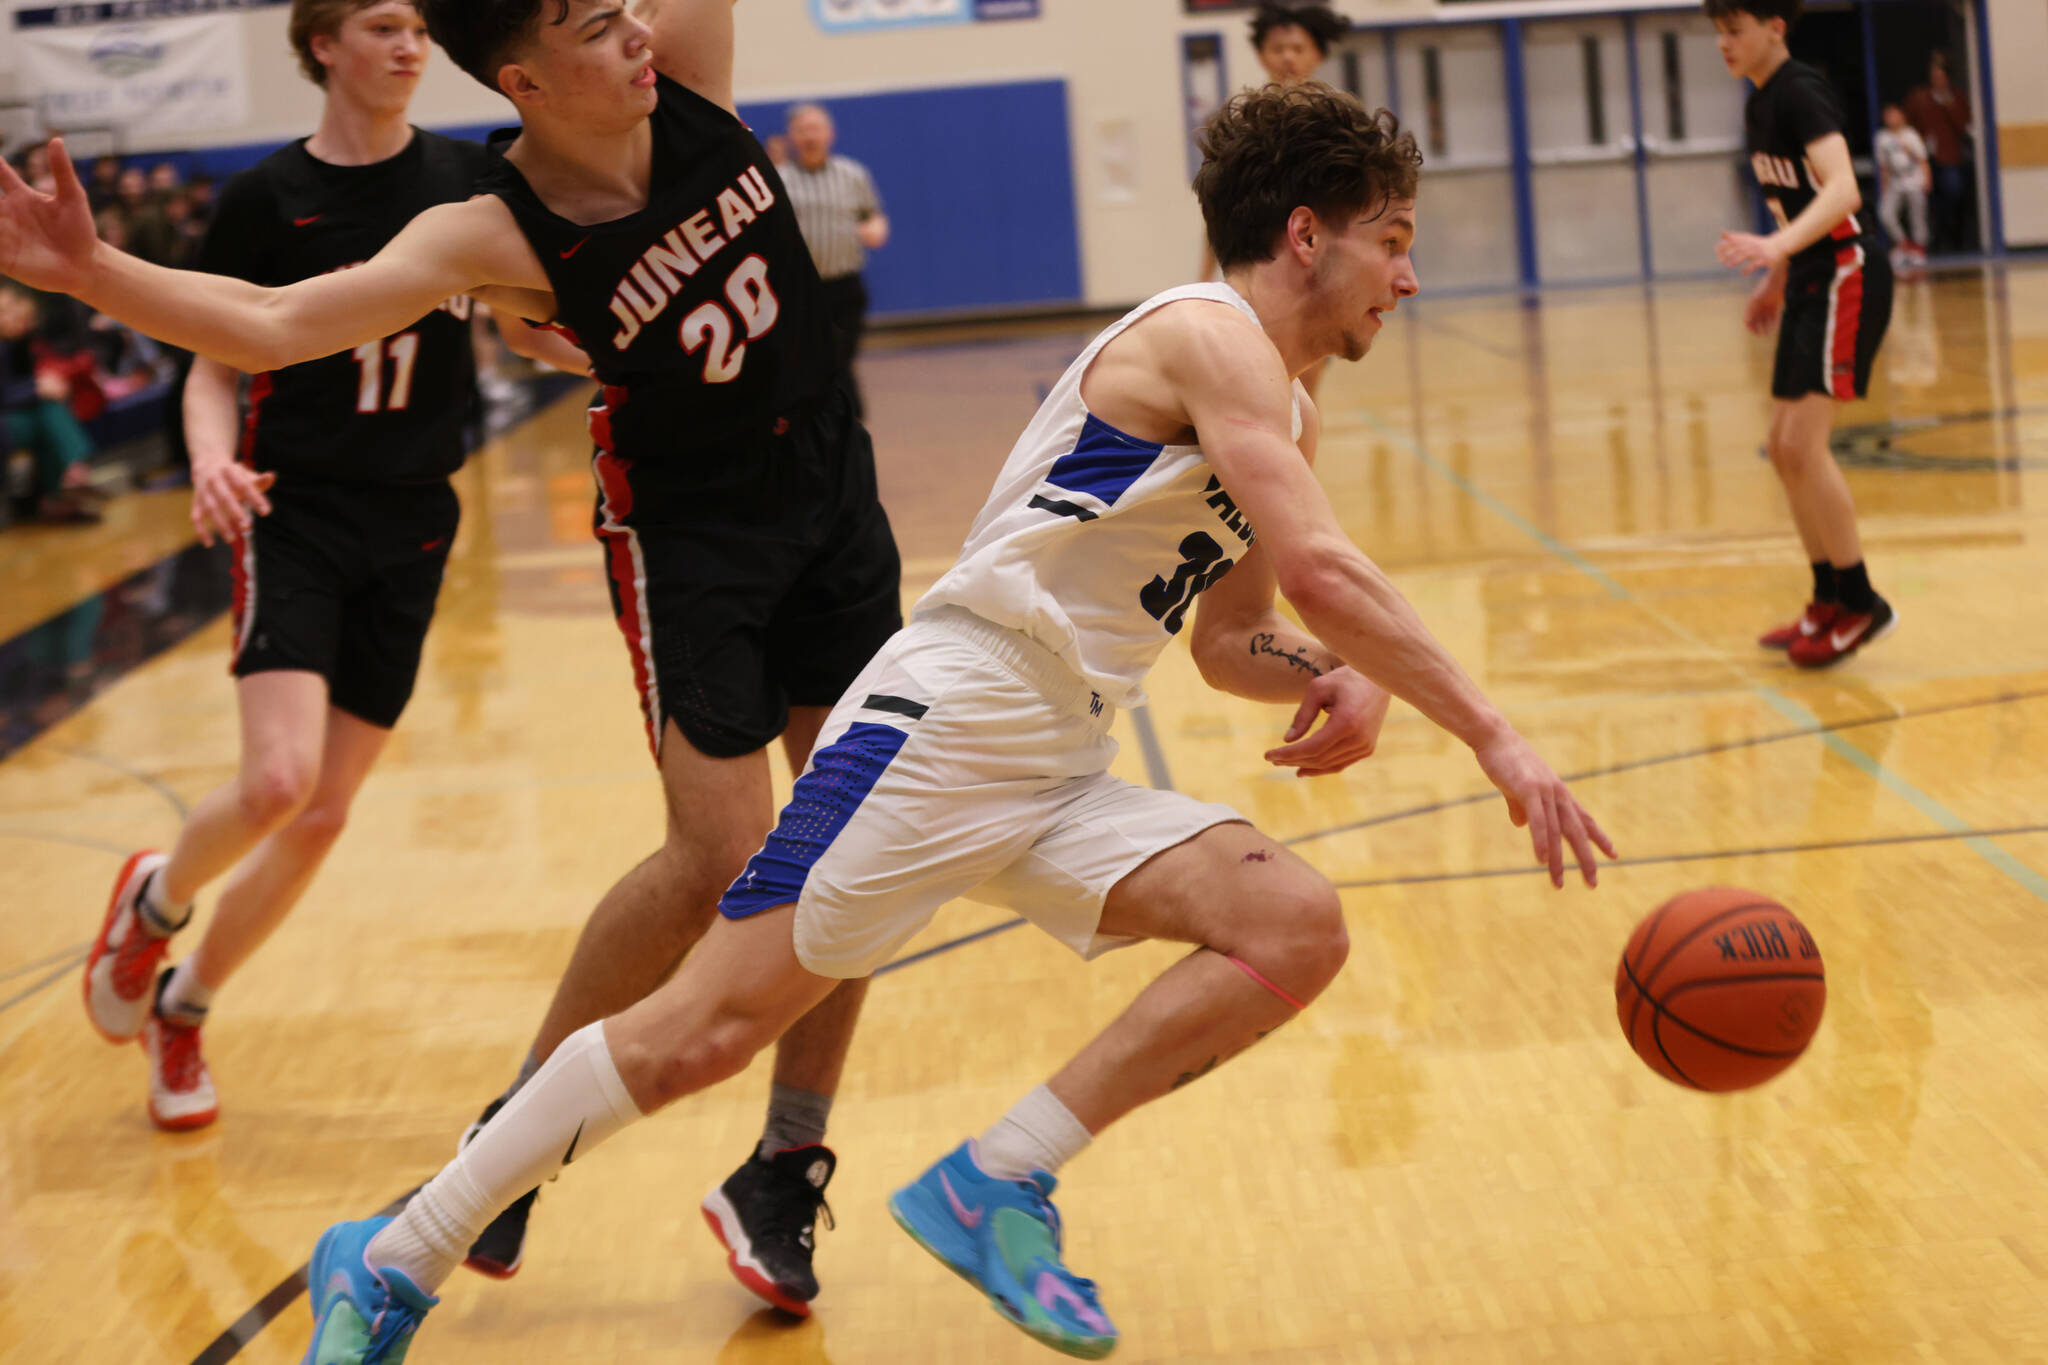 Ben Hohenstatt / Juneau Empire 
TMHS junior Thomas Baxter drives toward the hoop during a Thursday night home game against JDHS, Baxter led all scorers in the game with 18 points.